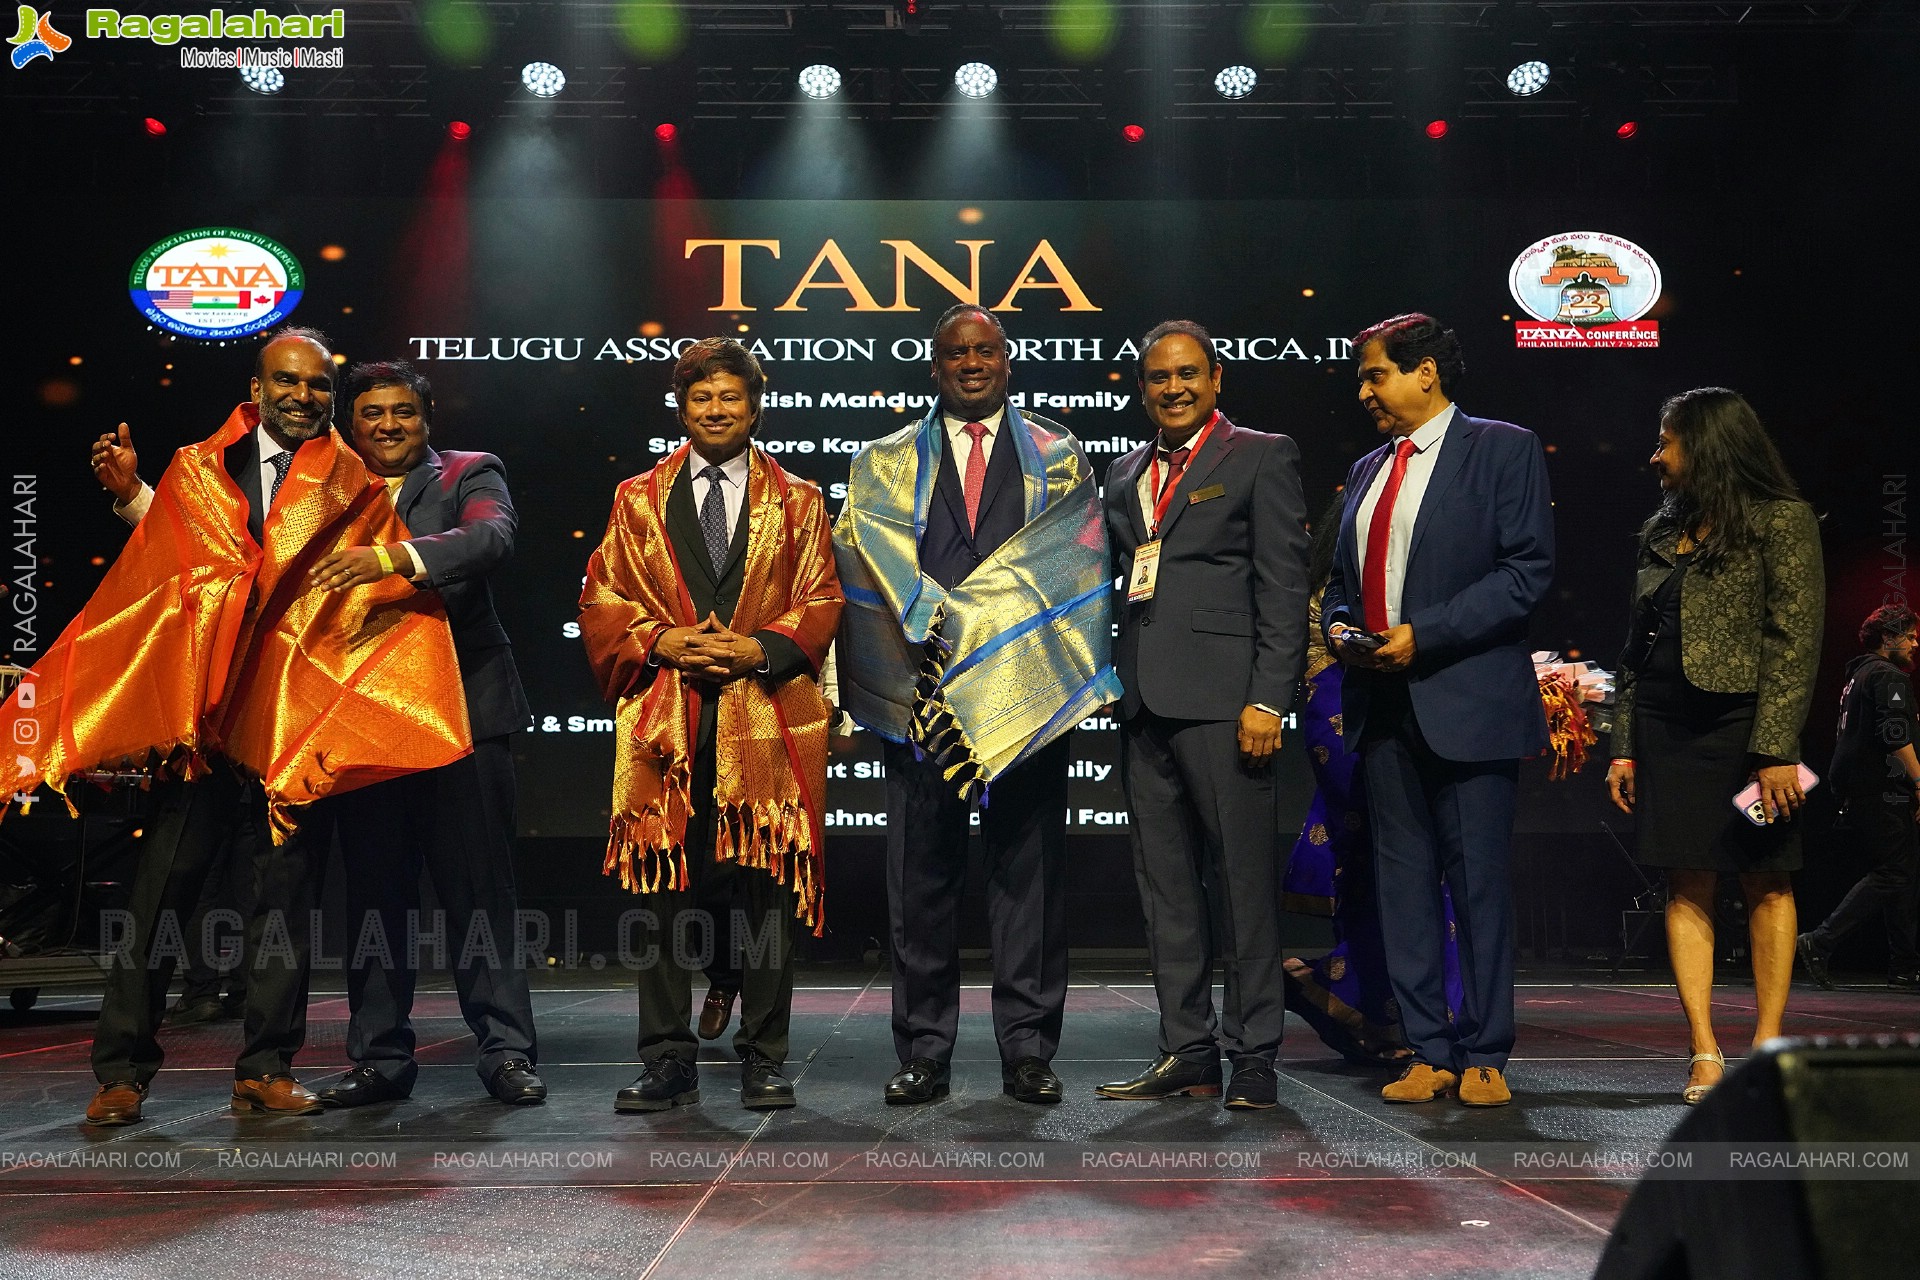 TANA Excellence & Presidential Recognition Awards @ 23rd TANA Convention Banquet Philadelphia